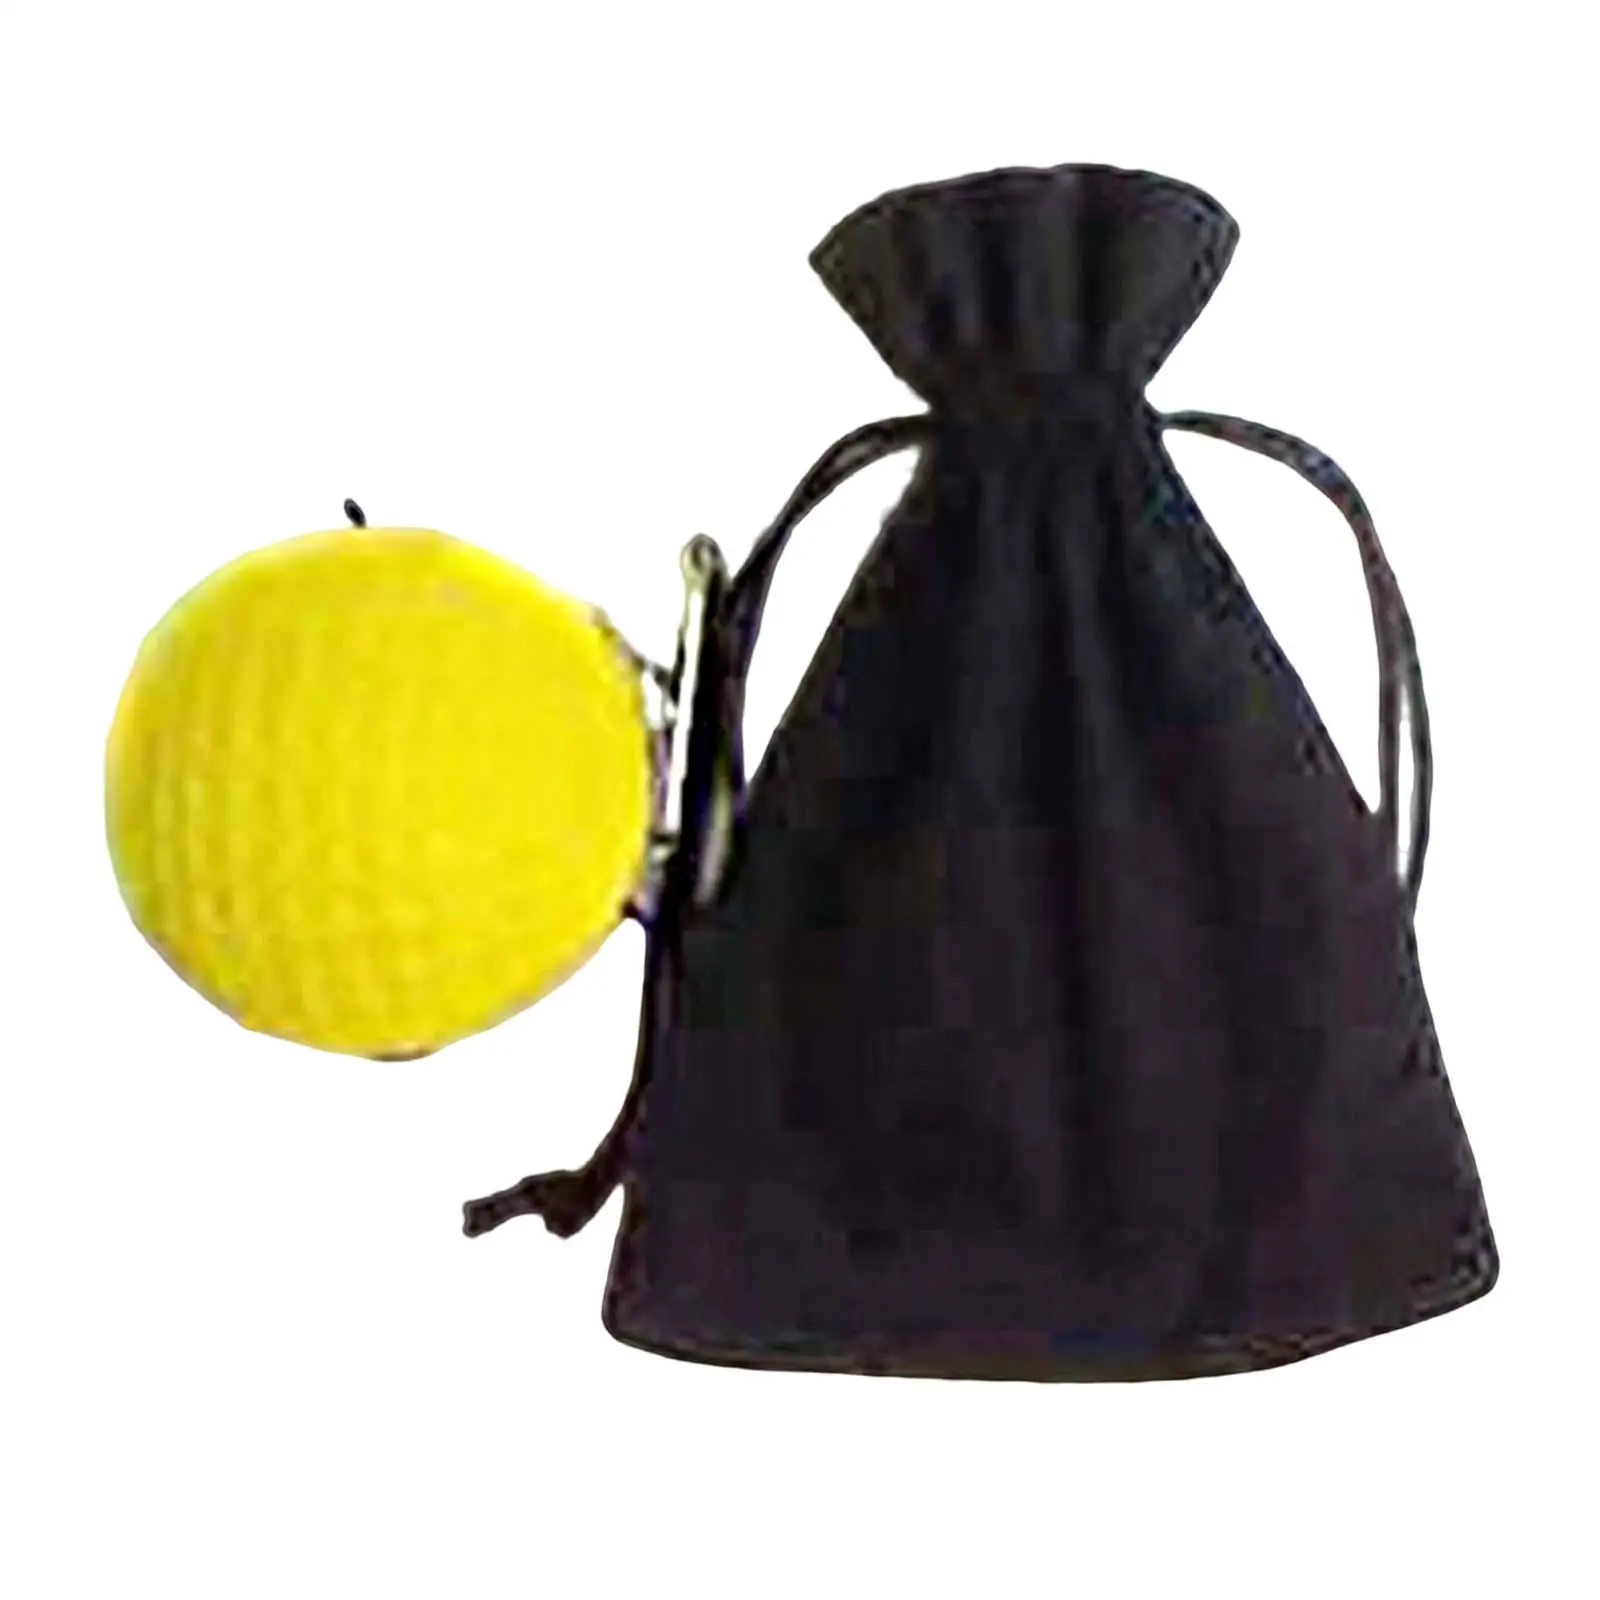 Golf heads balance Rotation Guide Steadhead Reusable for All Levels Golfers Fittings Device Practicing golf head trainer still